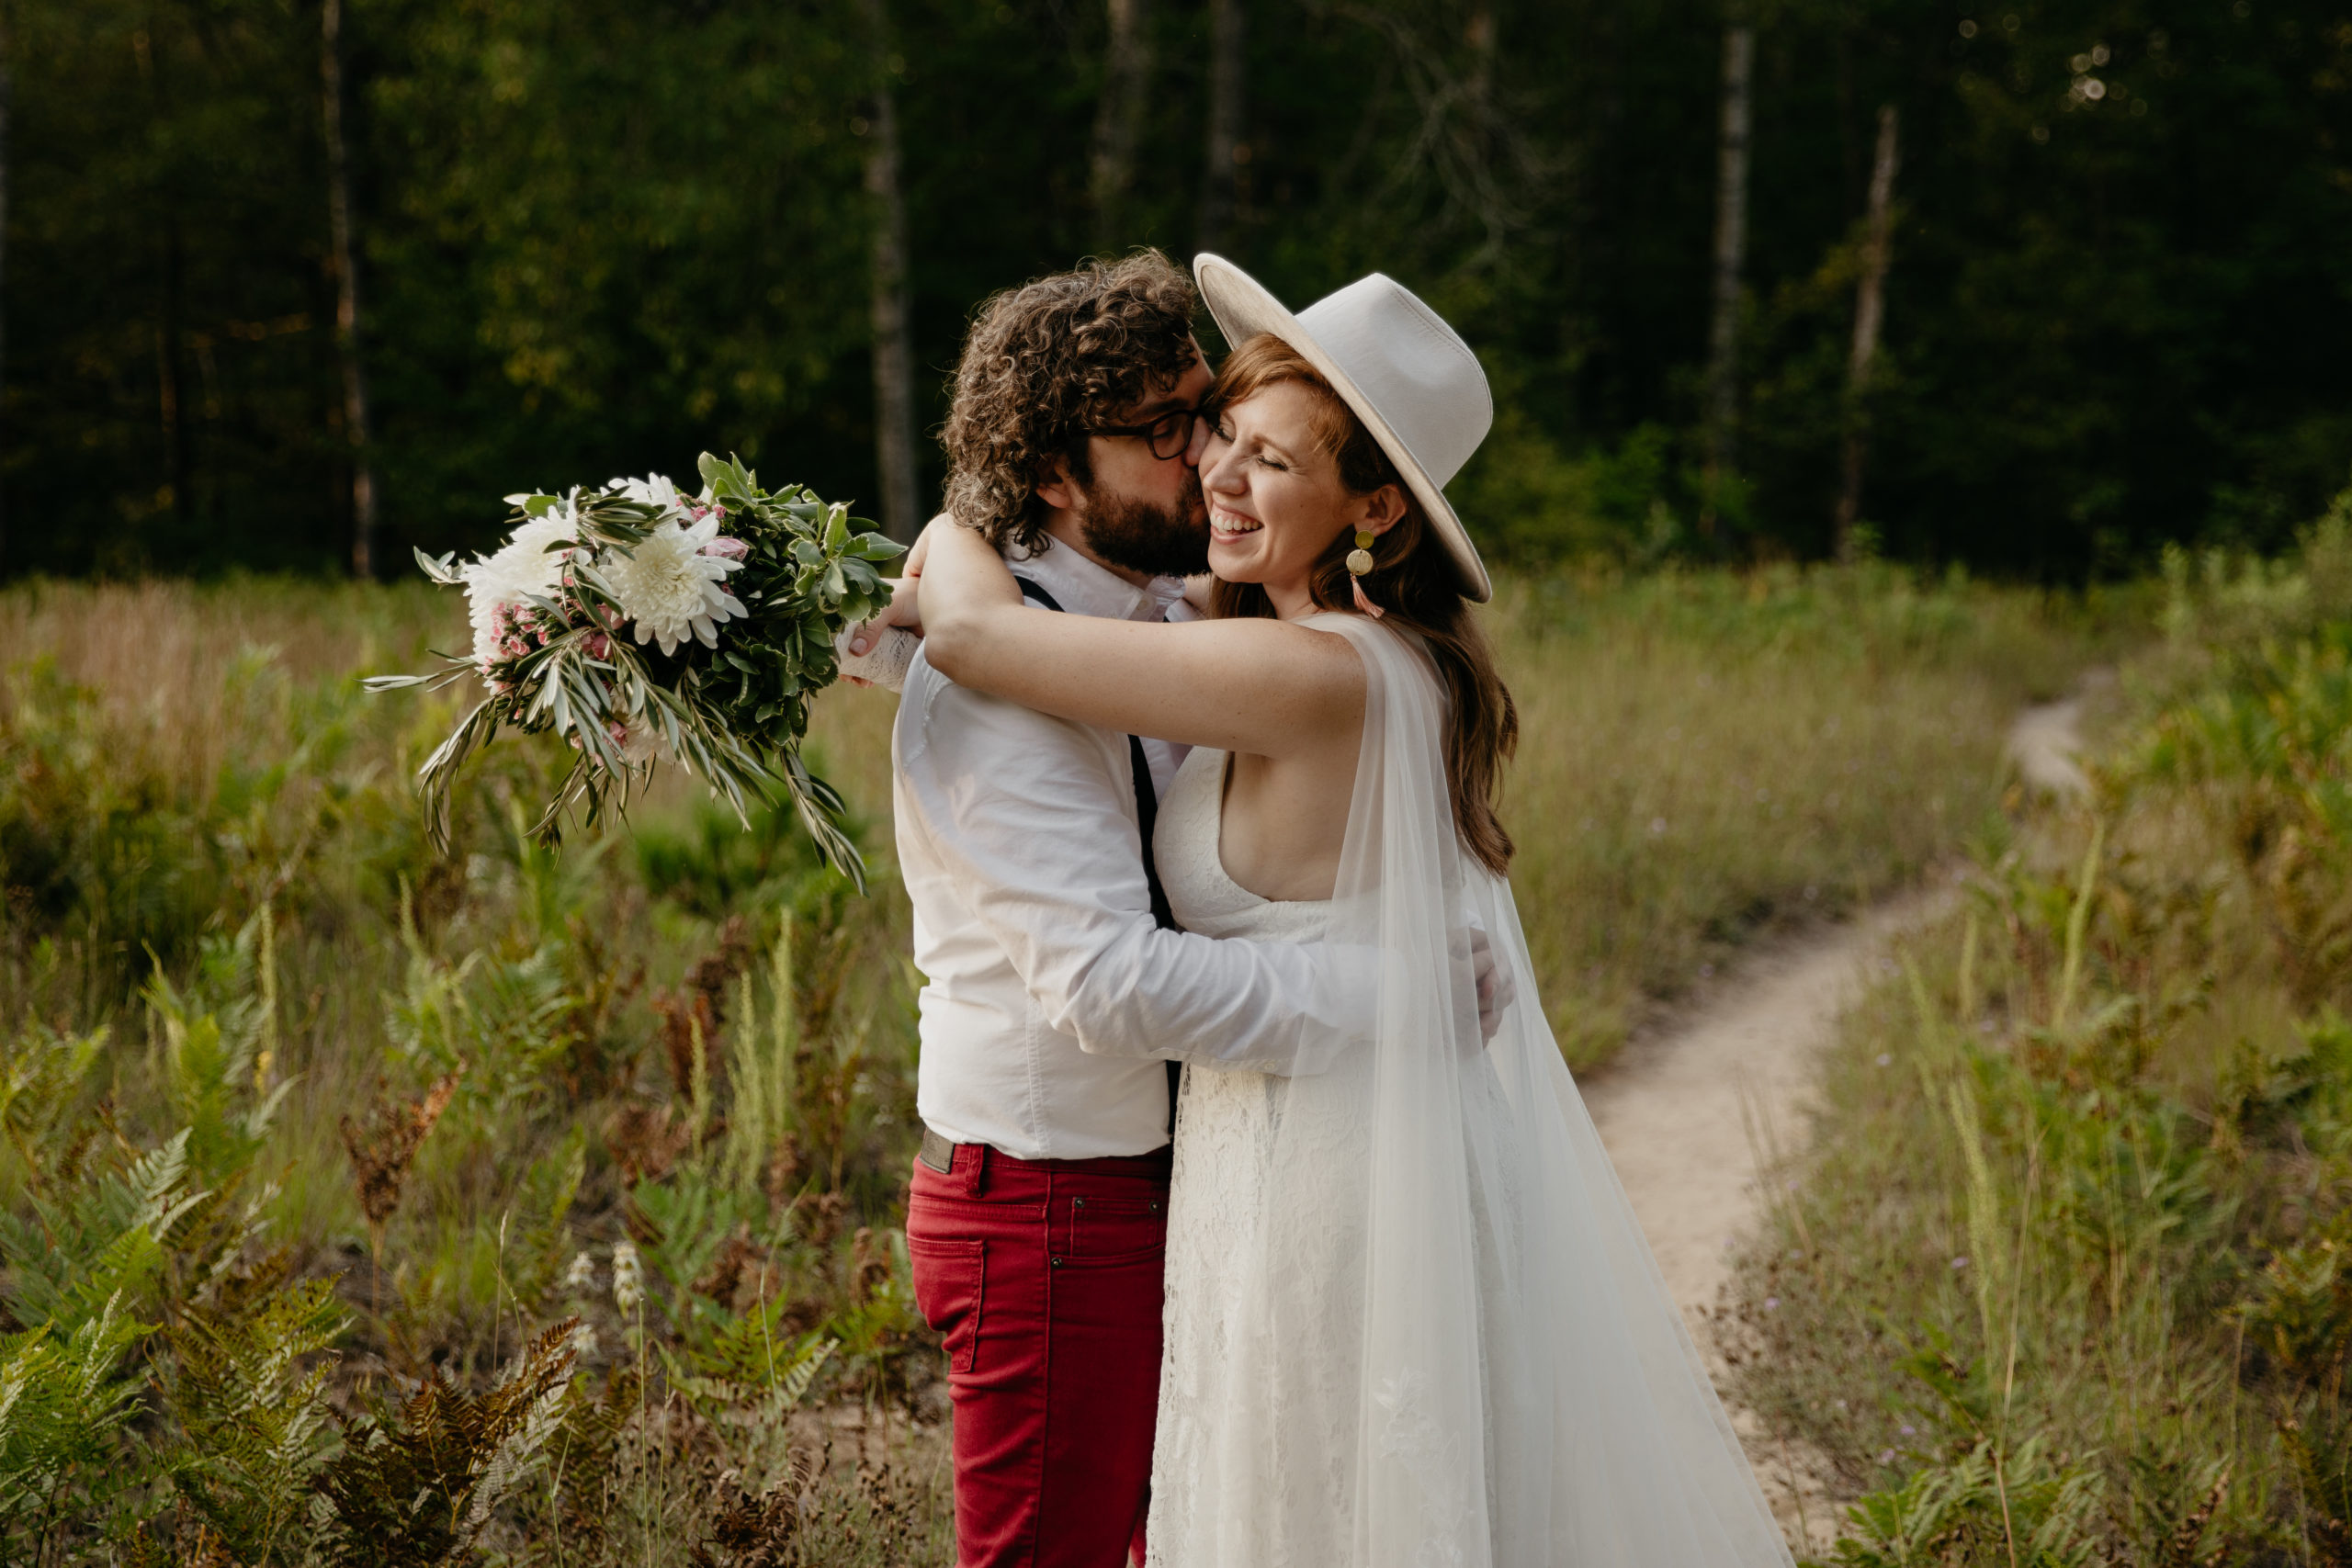 Signs you should elope instead of having a traditional wedding